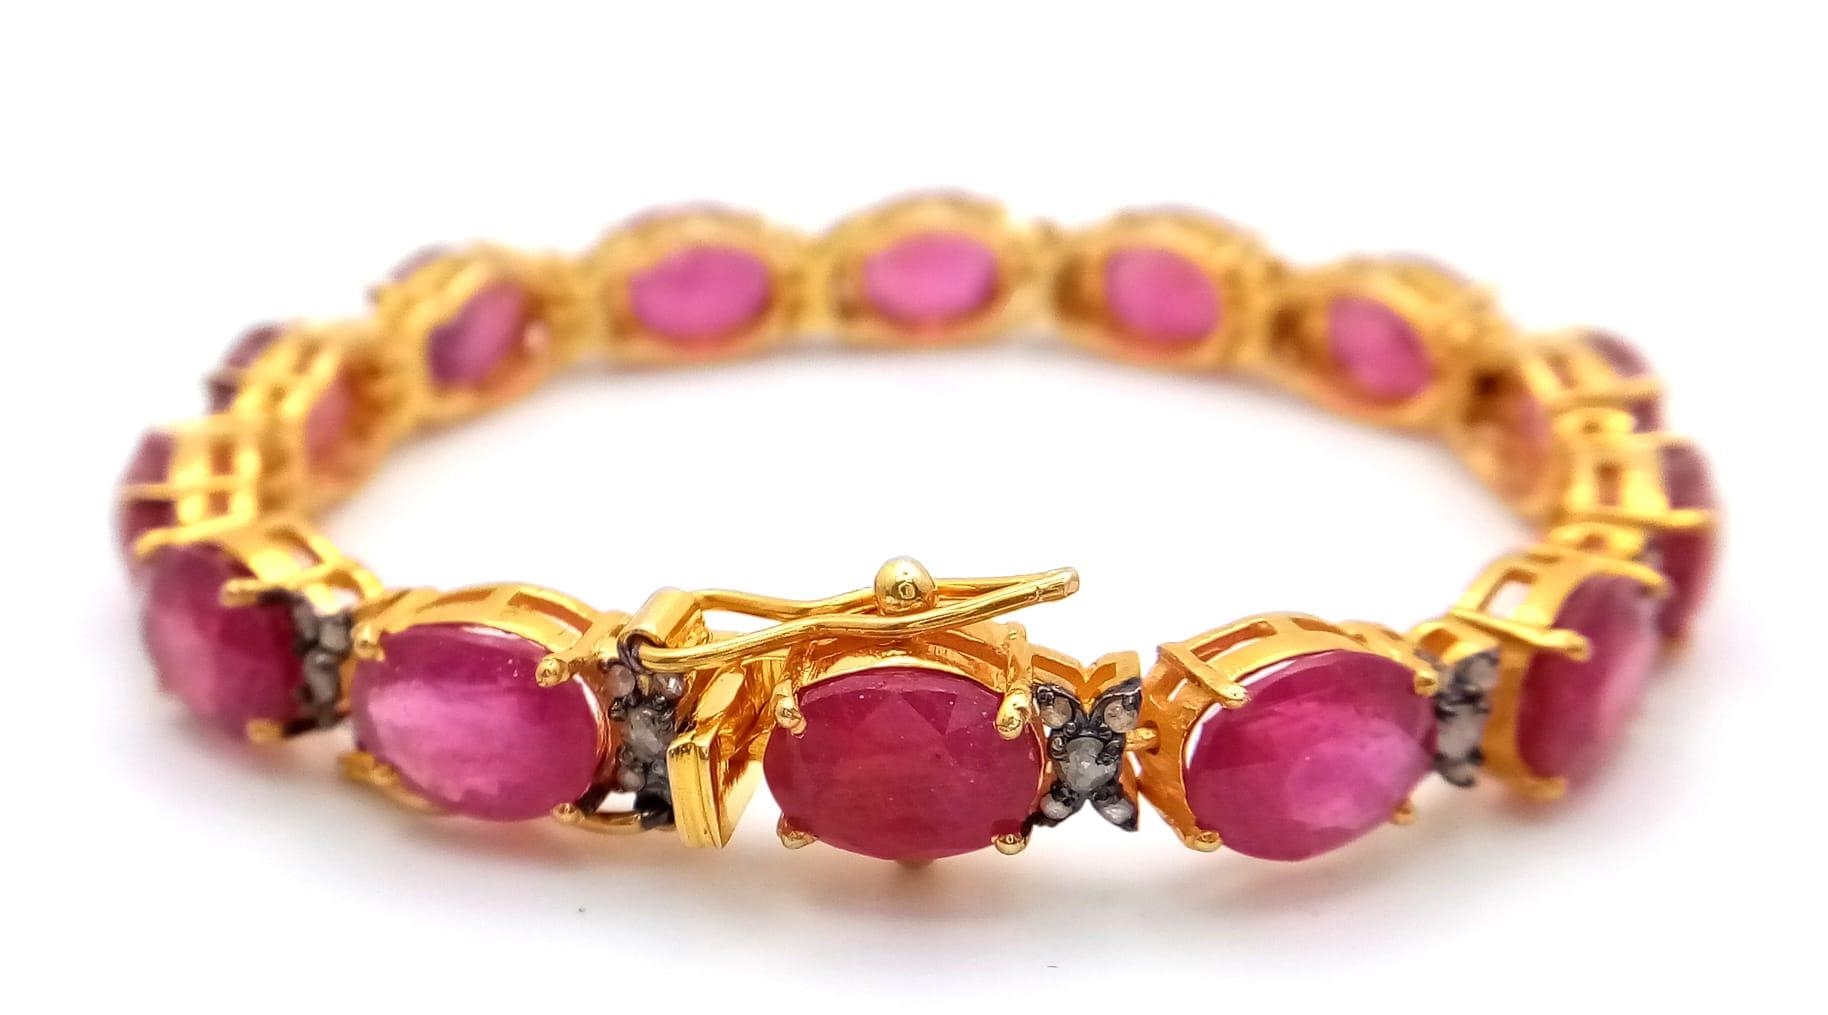 An Oval Cut Ruby and Diamond Gemstone Tennis Bracelet set in Gold Plated 925 Silver. 50ctw Rubies - Image 2 of 4